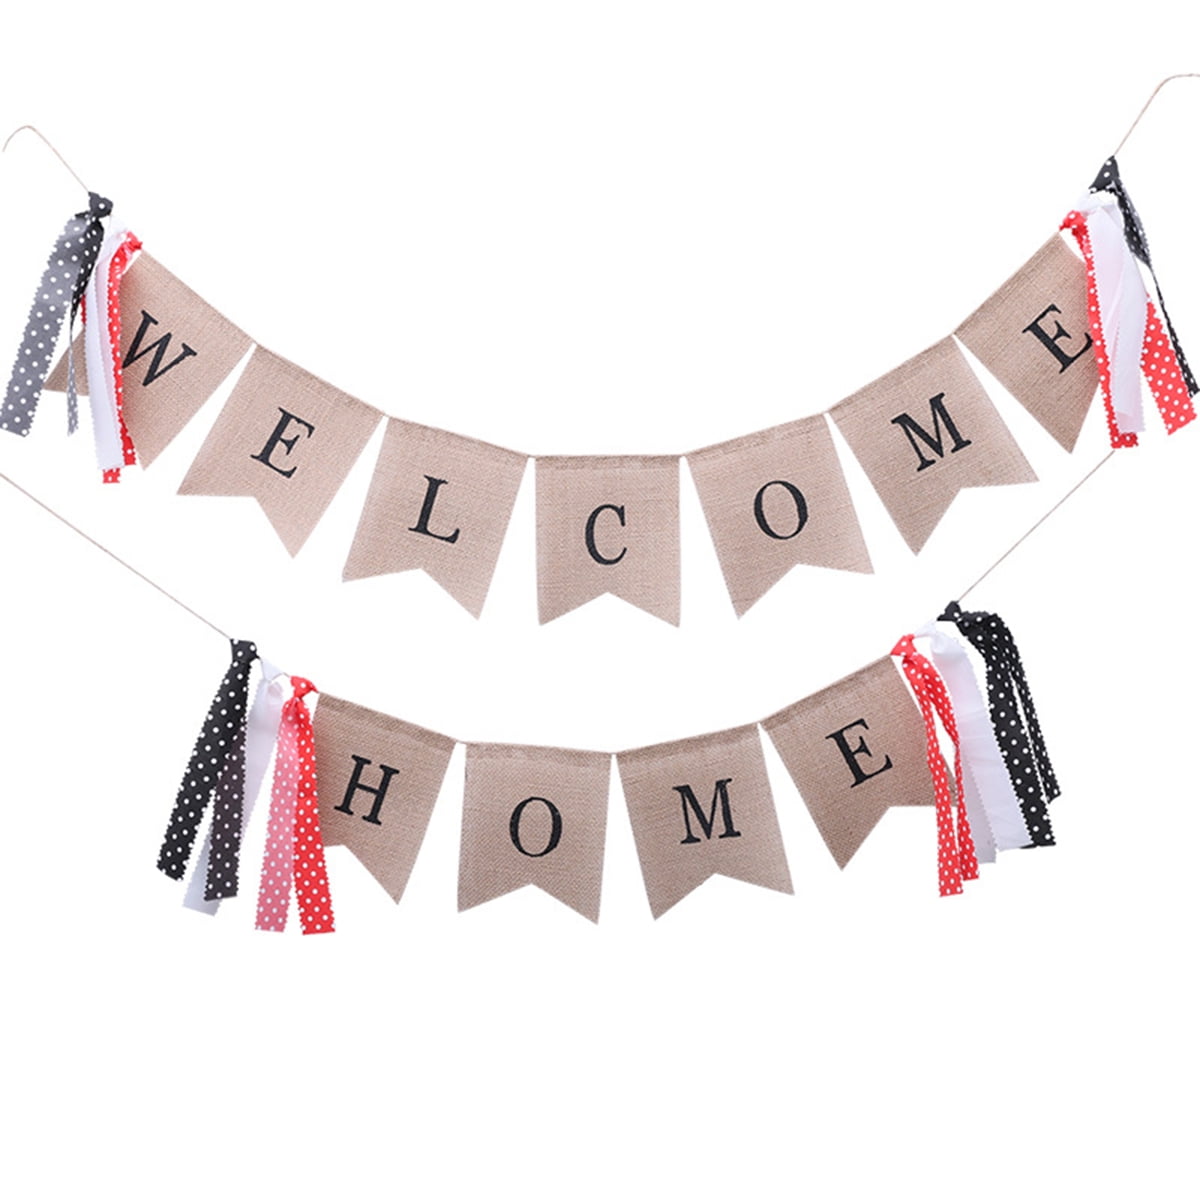 1 count 1/Pkg Metallic Welcome Home Fringe Banner Party Accessory 